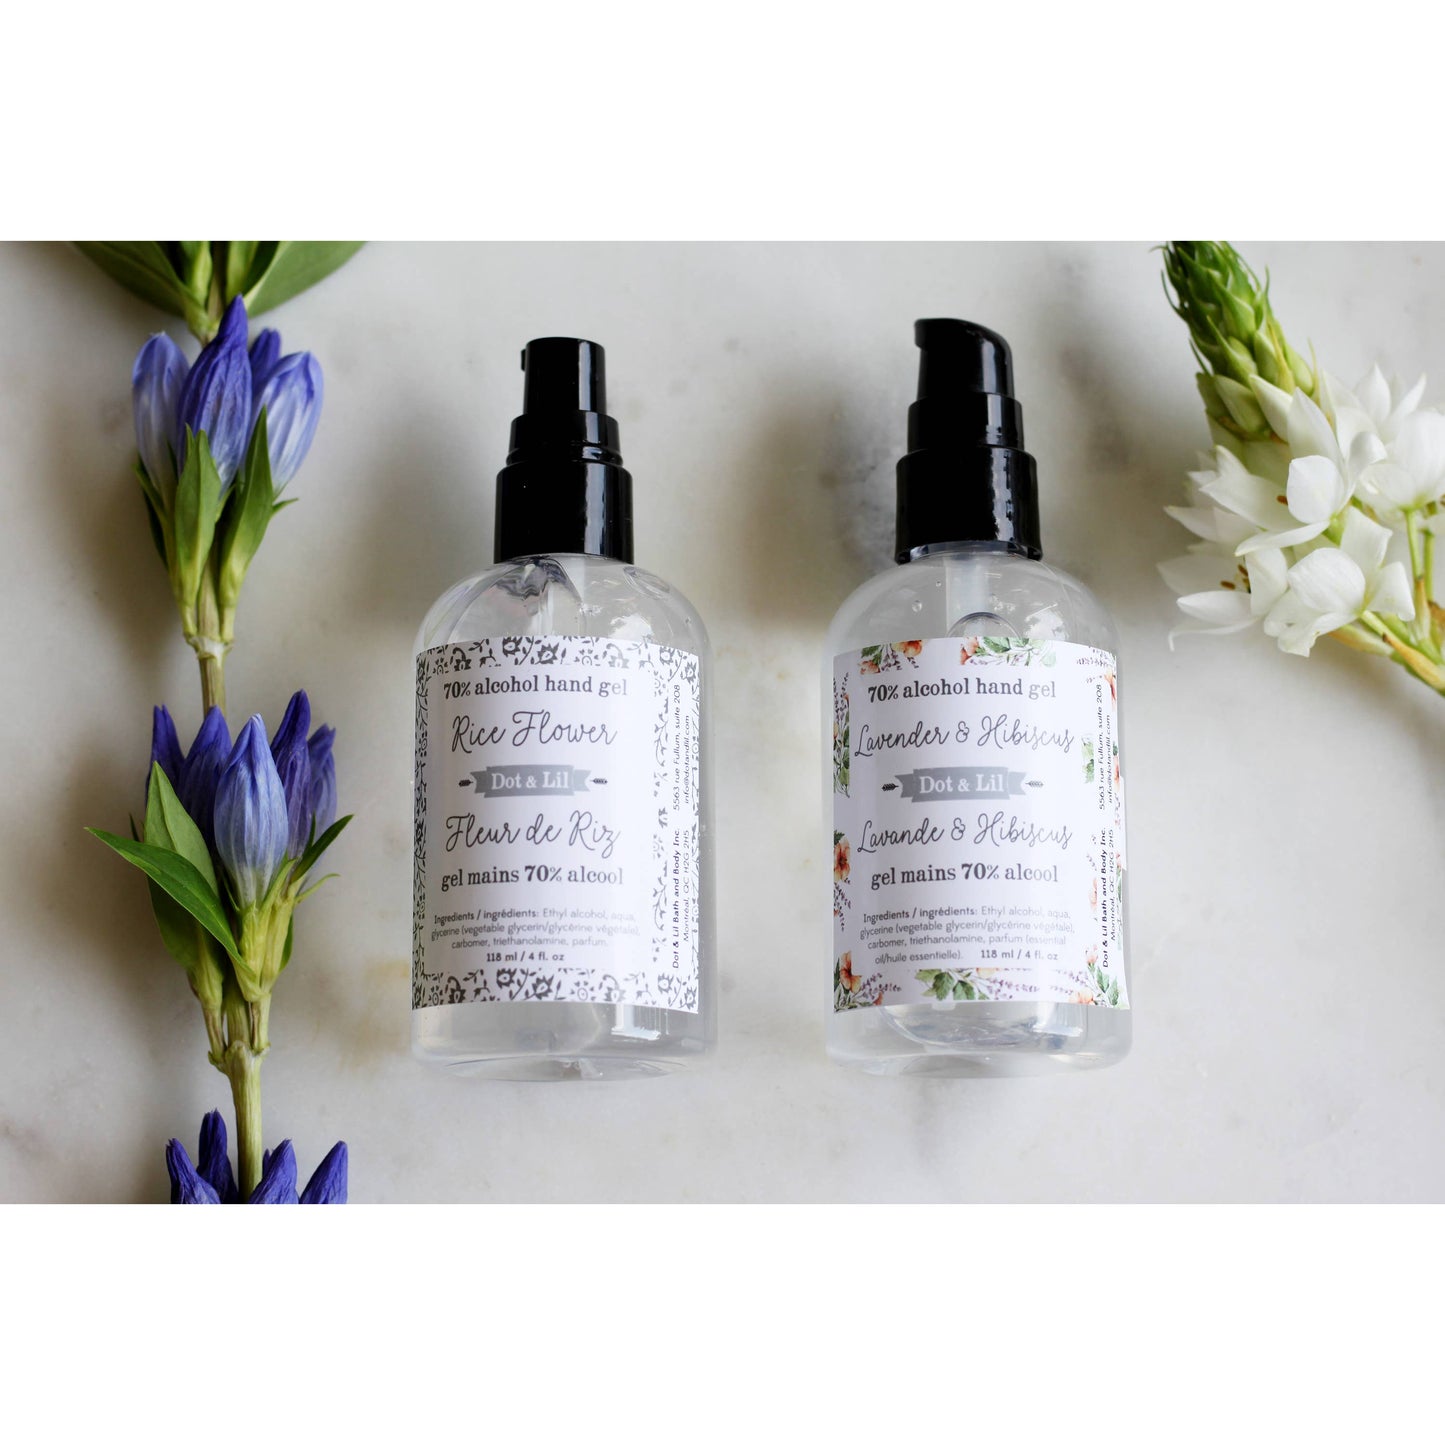 Dot & Lil - Small Rice Flower Alcohol Hand Gel